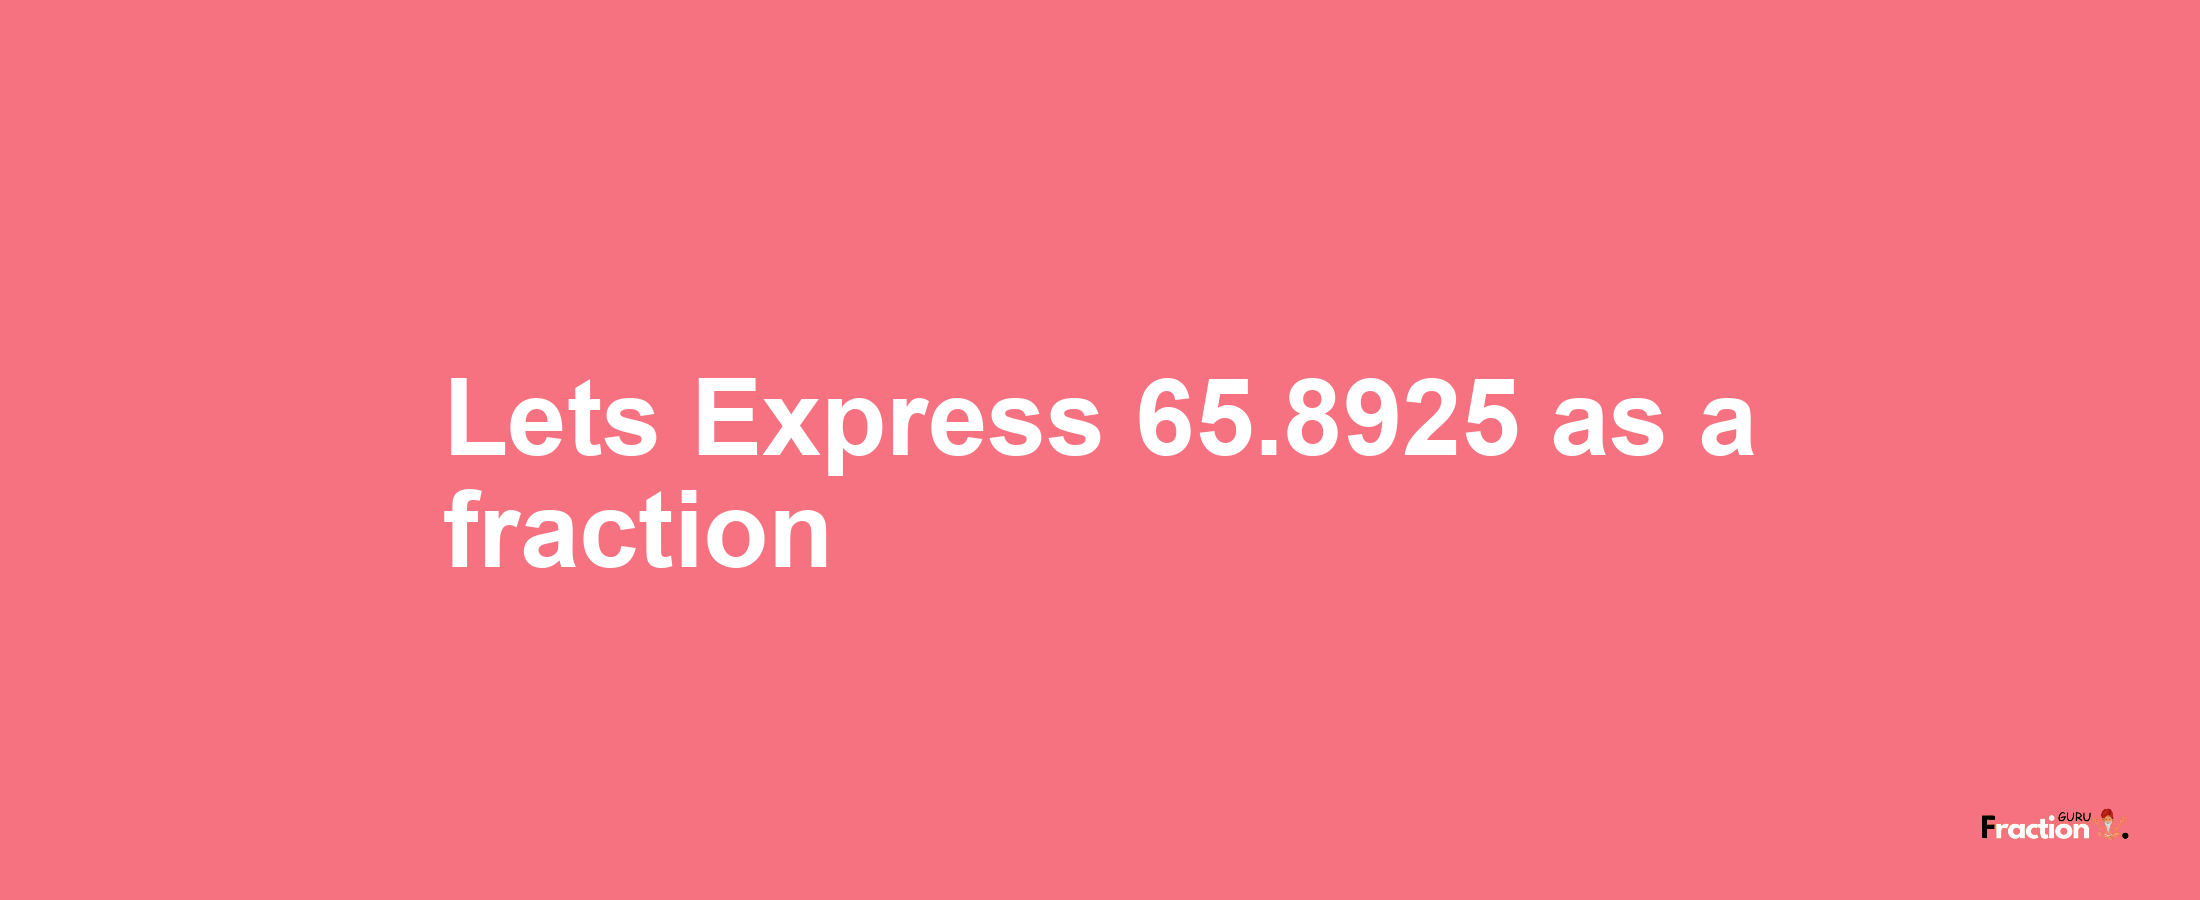 Lets Express 65.8925 as afraction